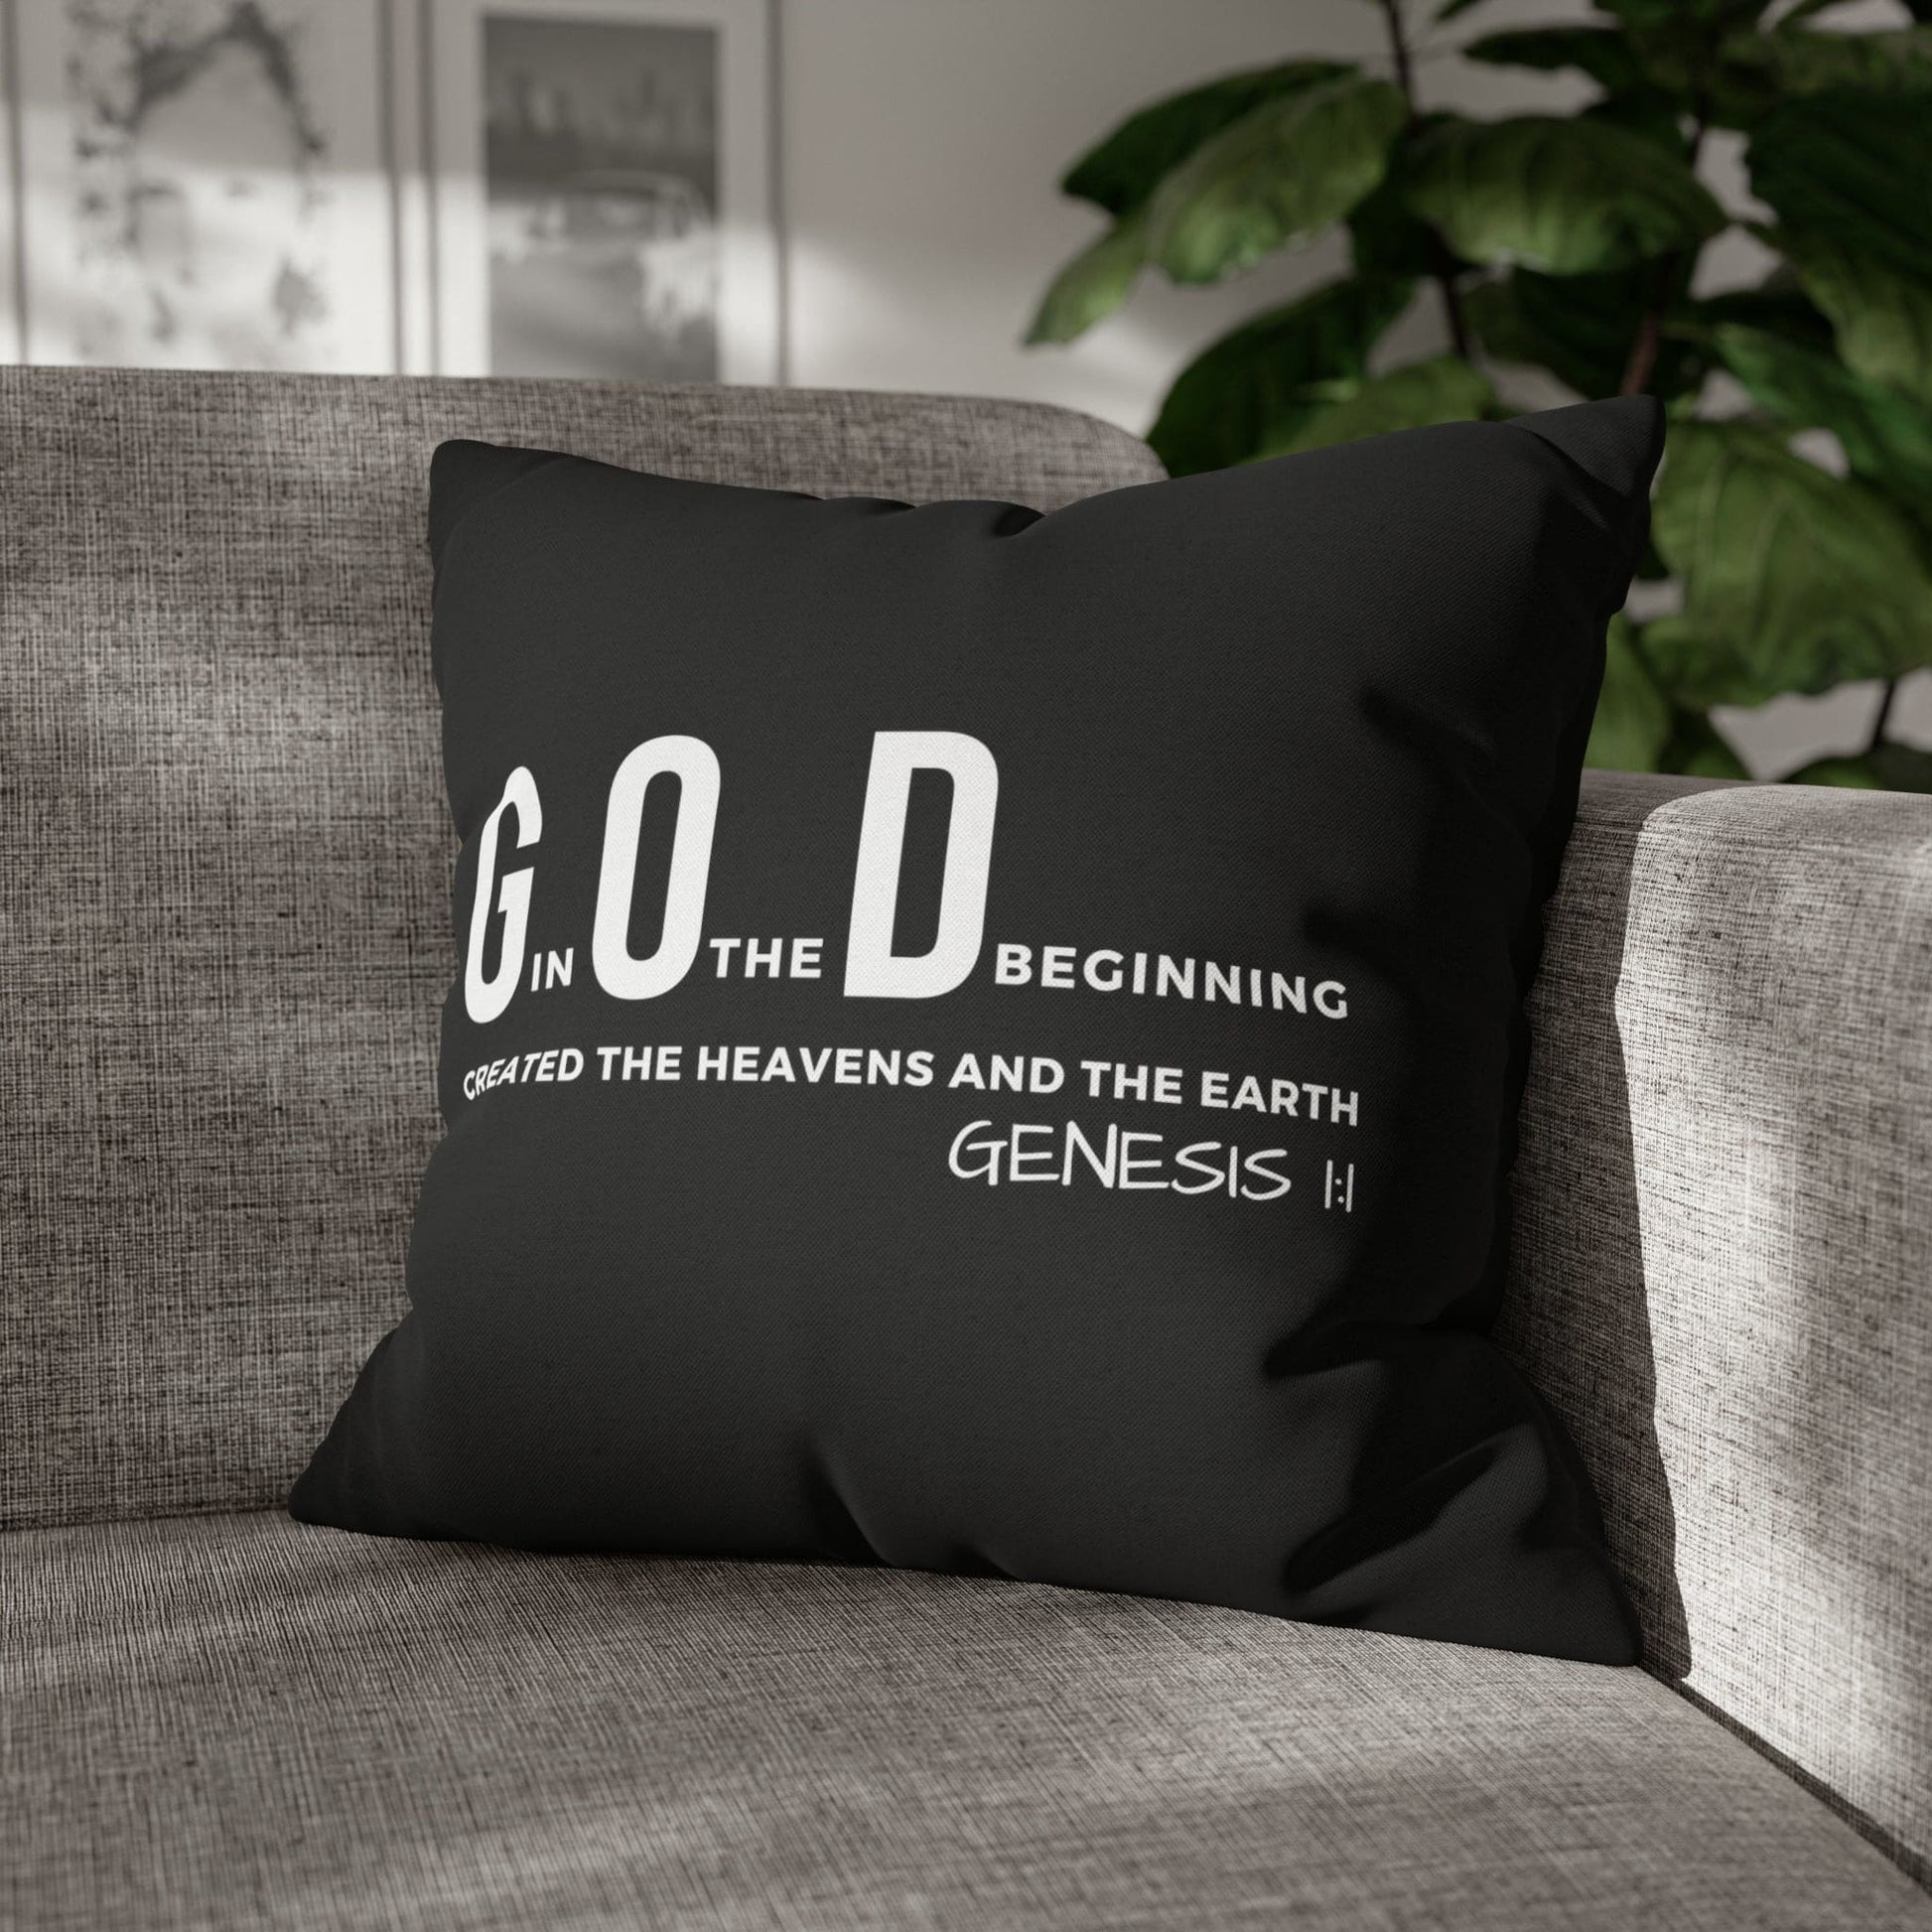 Decorative Throw Pillow Cover - Set Of 2, God In The Beginning Created The Heavens And The Earth - Scripture Verse-8